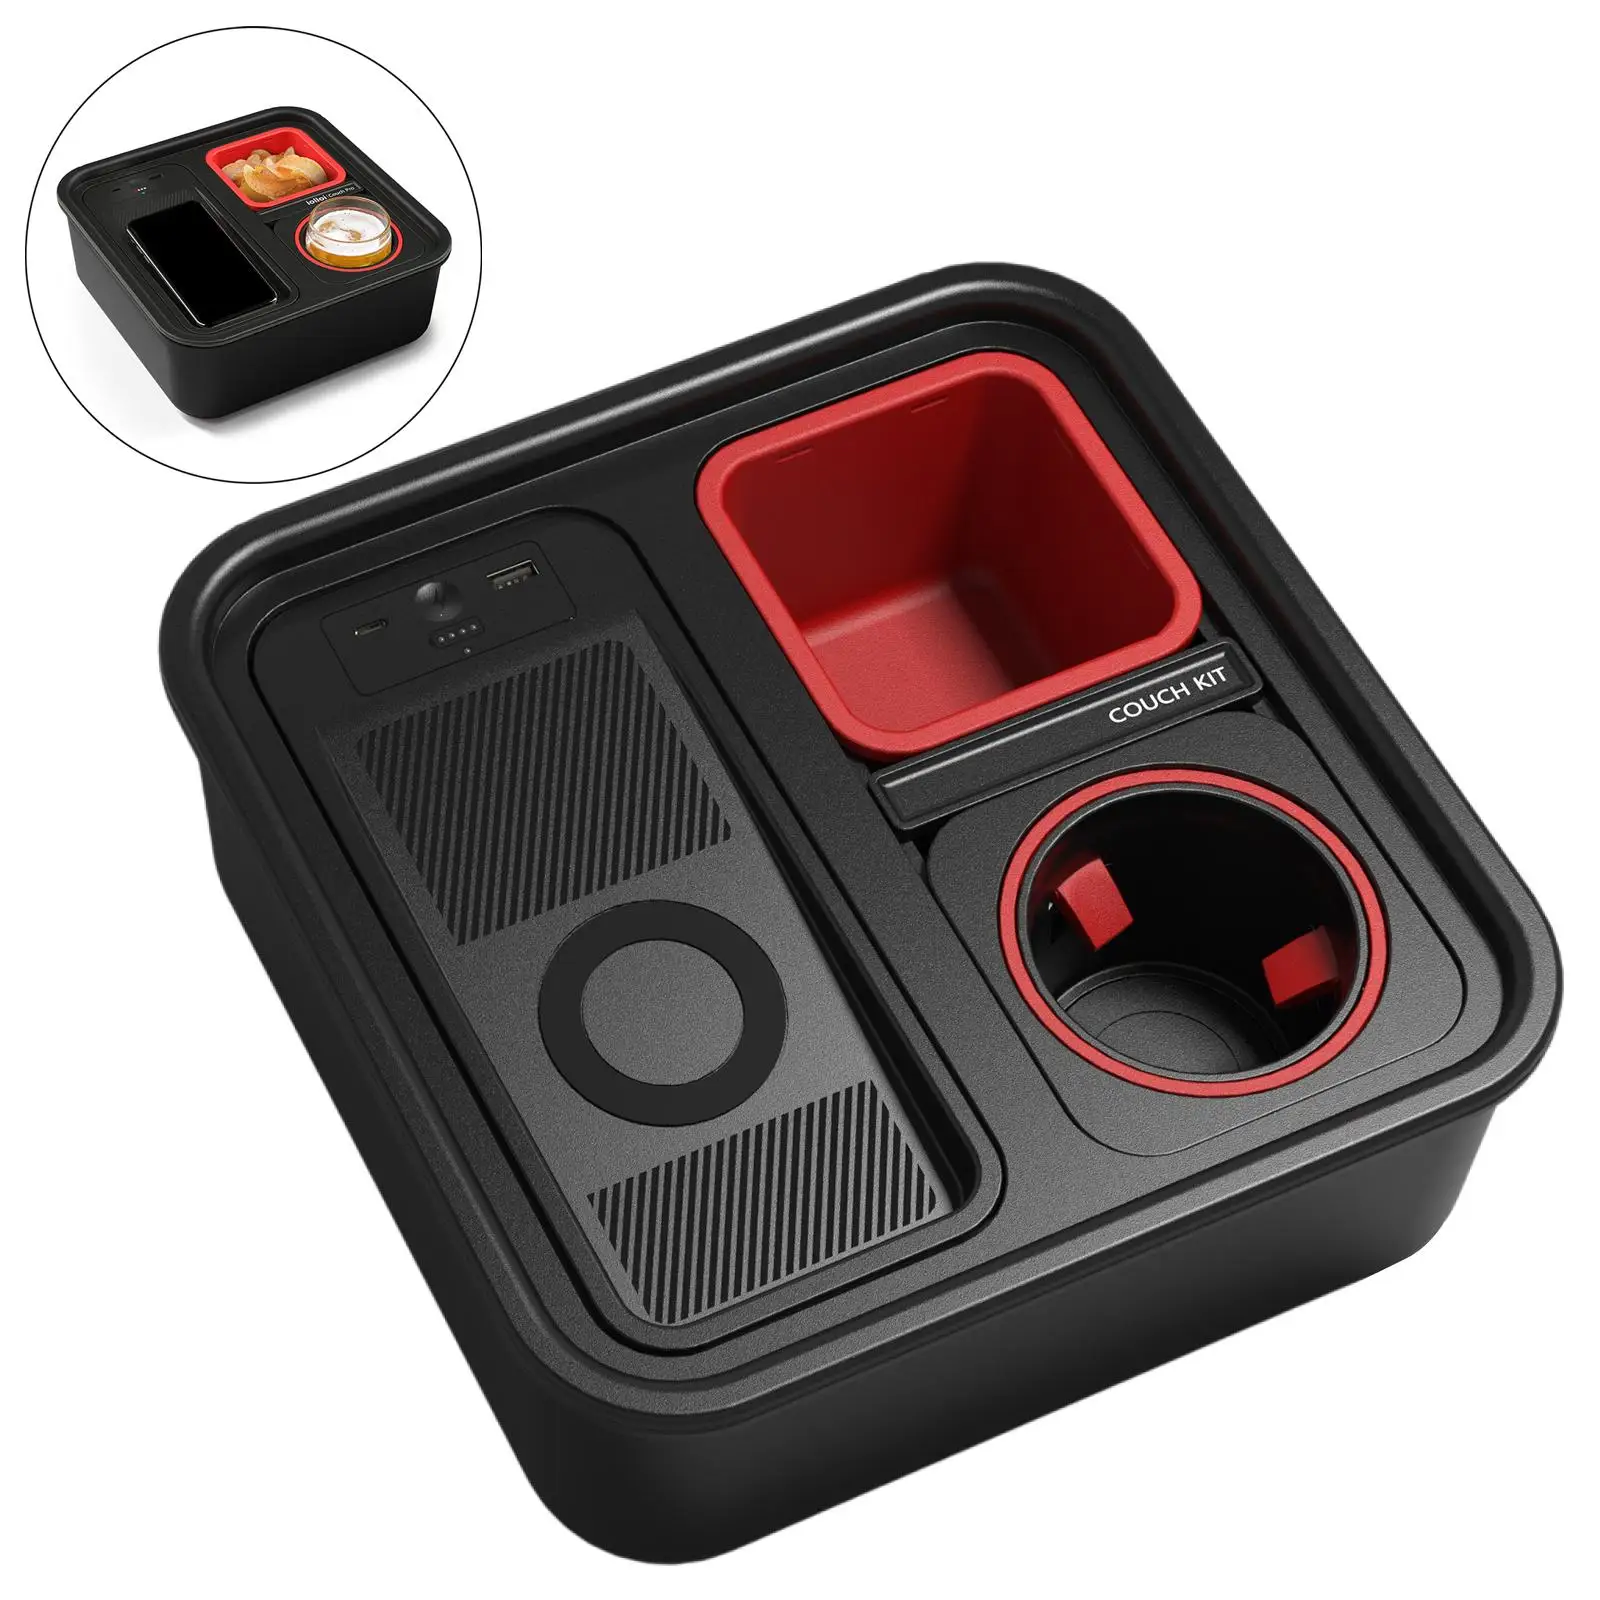 Cup Holder Removable 750ml Self Balancing Storage Freestanding Creative Wireless Sofa Tray for Bed Travel Couch Video Gaming Car